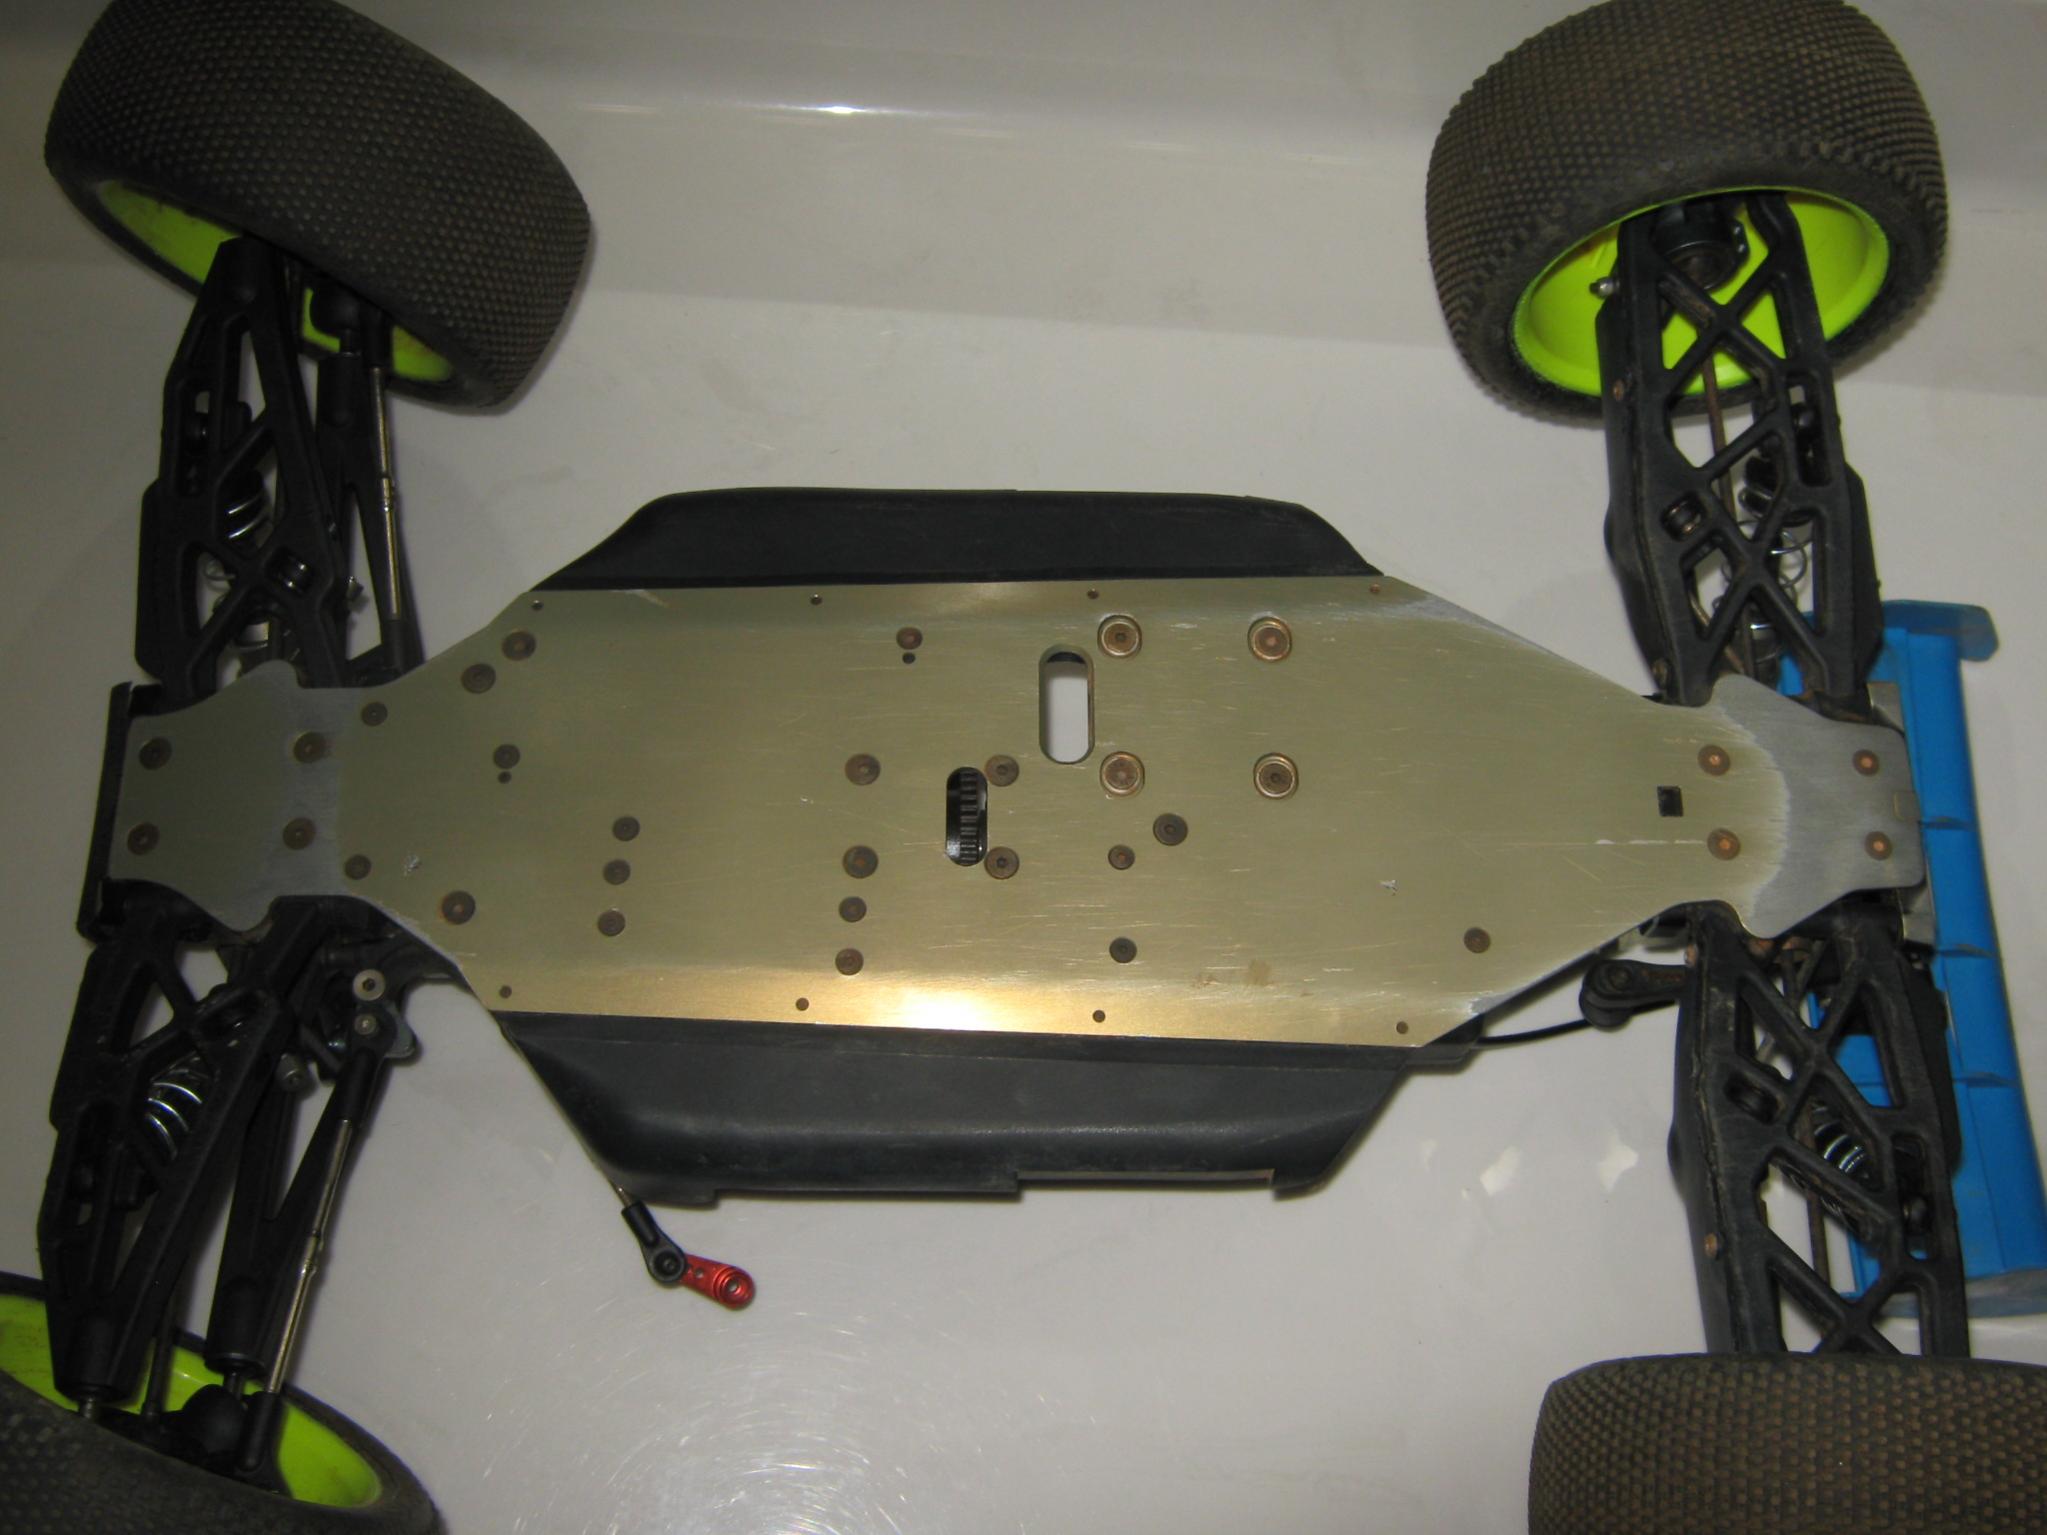 USED MUGEN MBX6T TRUGGY FORSALE ALUM TOWERS, M2C UPGRADES CUSTOM